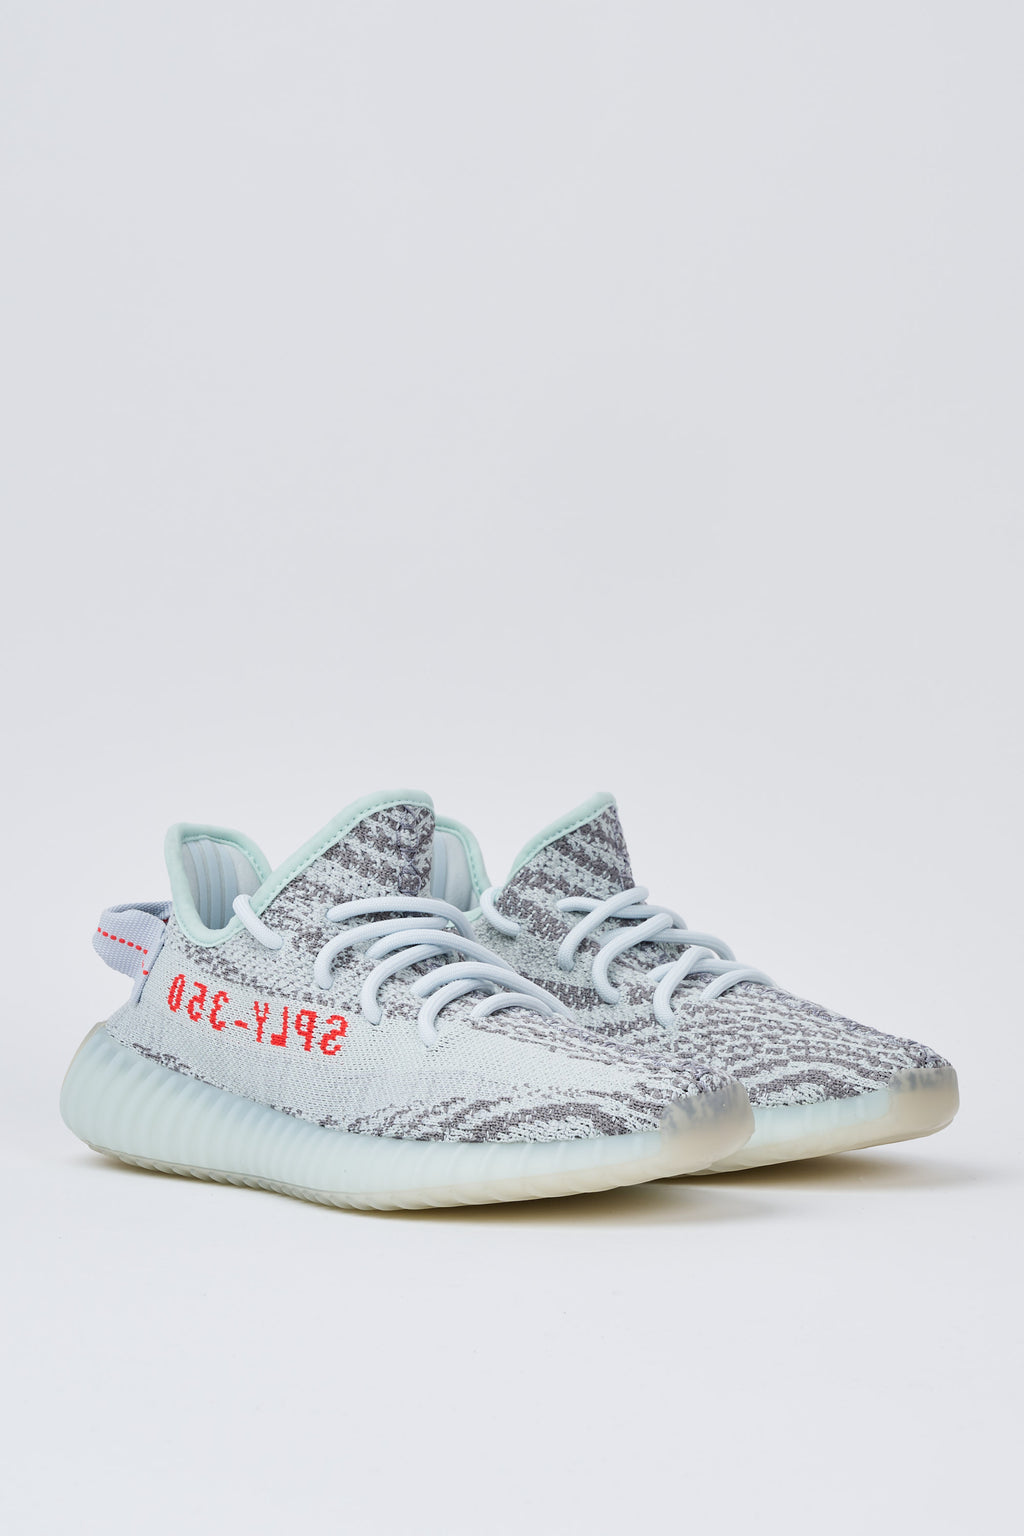 Adidas Yeezy Made By 350 Blue Tint Donna » Miss Kiss Negozio